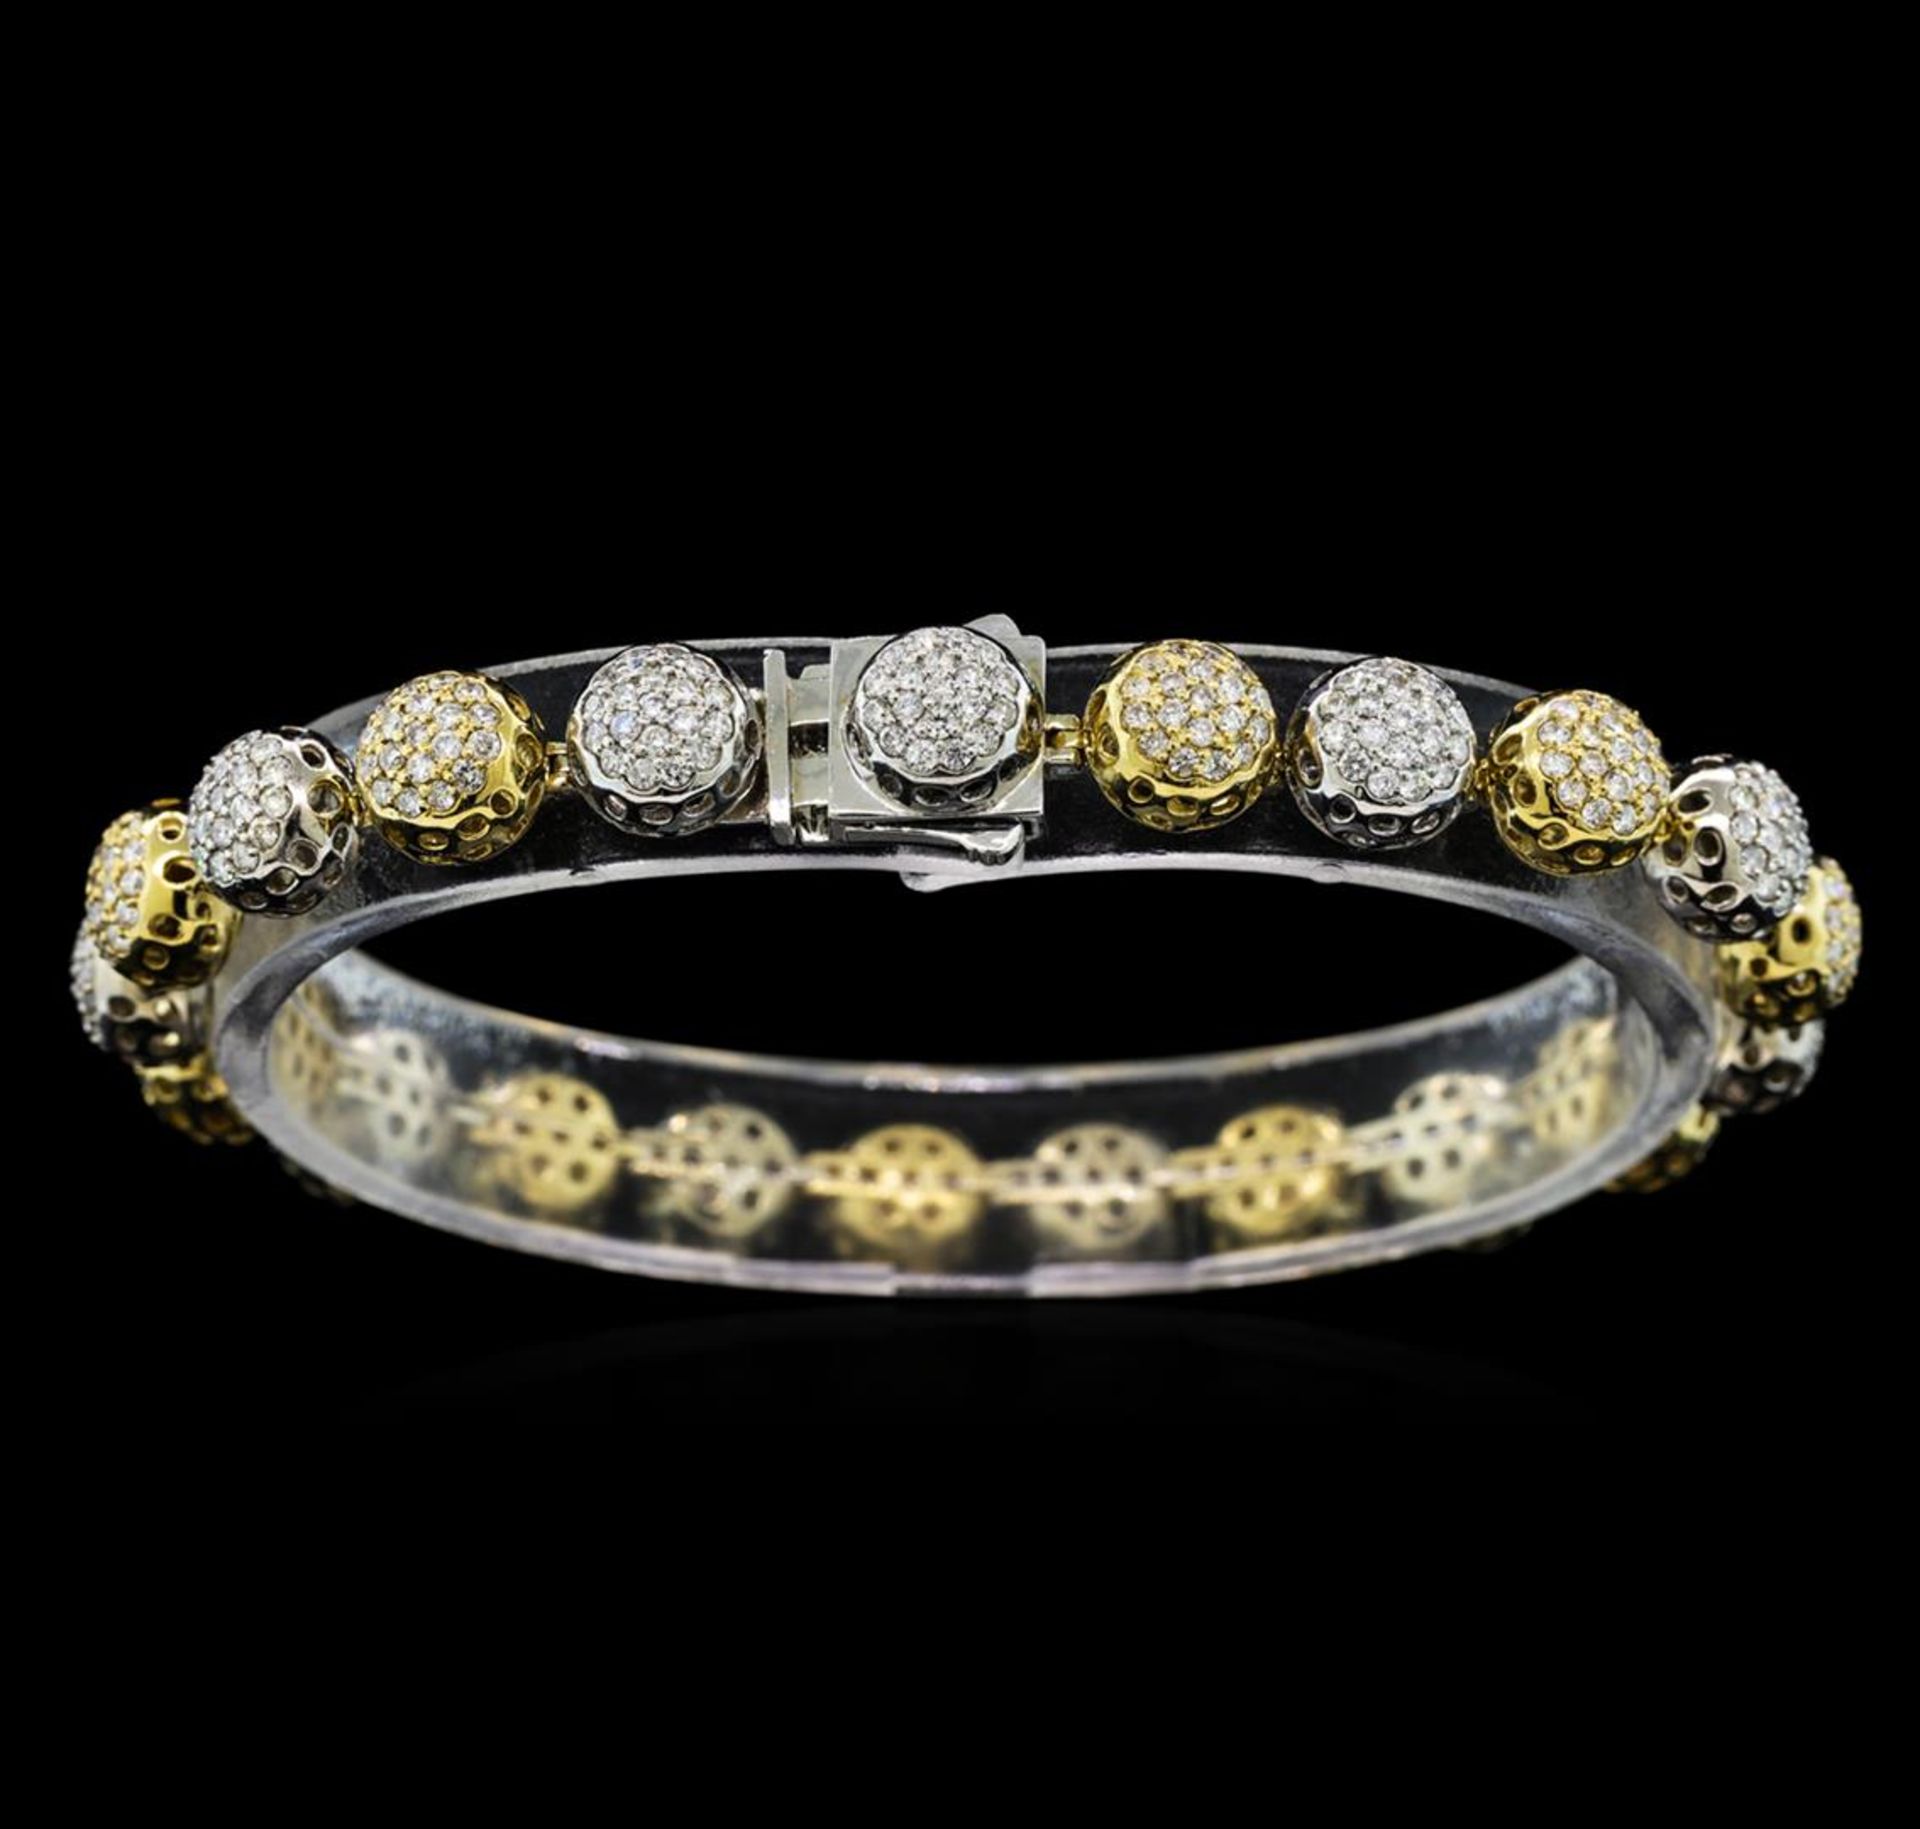 3.35 ctw Diamond Bracelet - 14KT White and Yellow Gold - Image 2 of 4